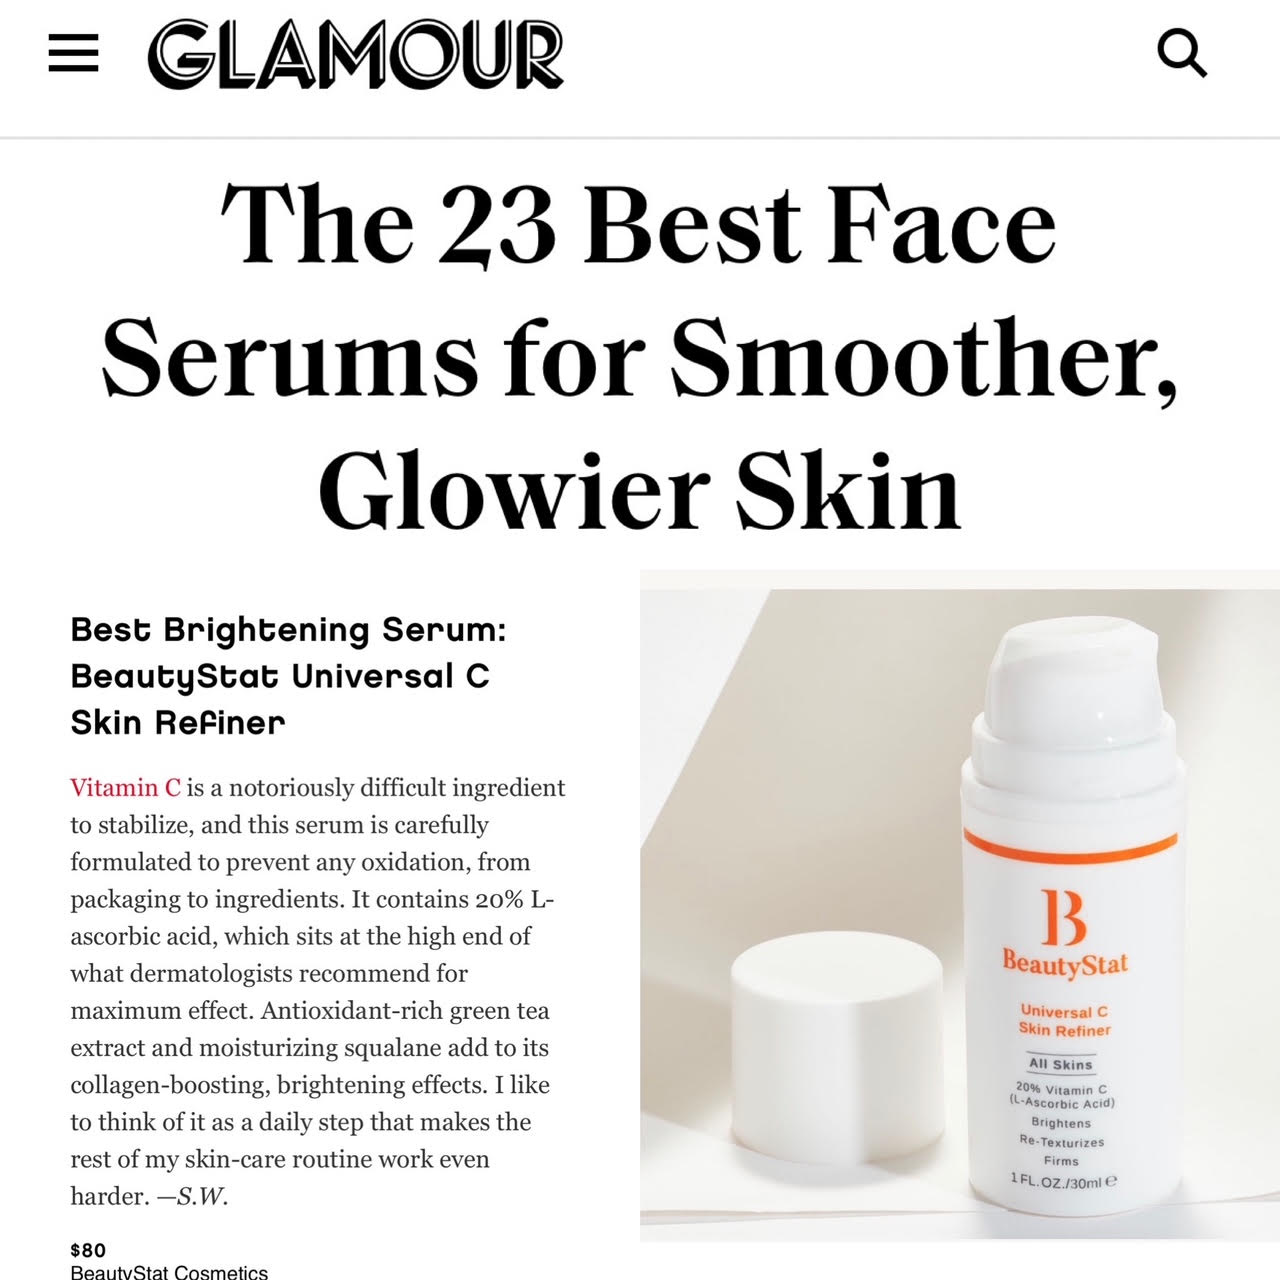 Glamour named our Universal C Skin Refiner as best brightening vitamin C serum. See article here.